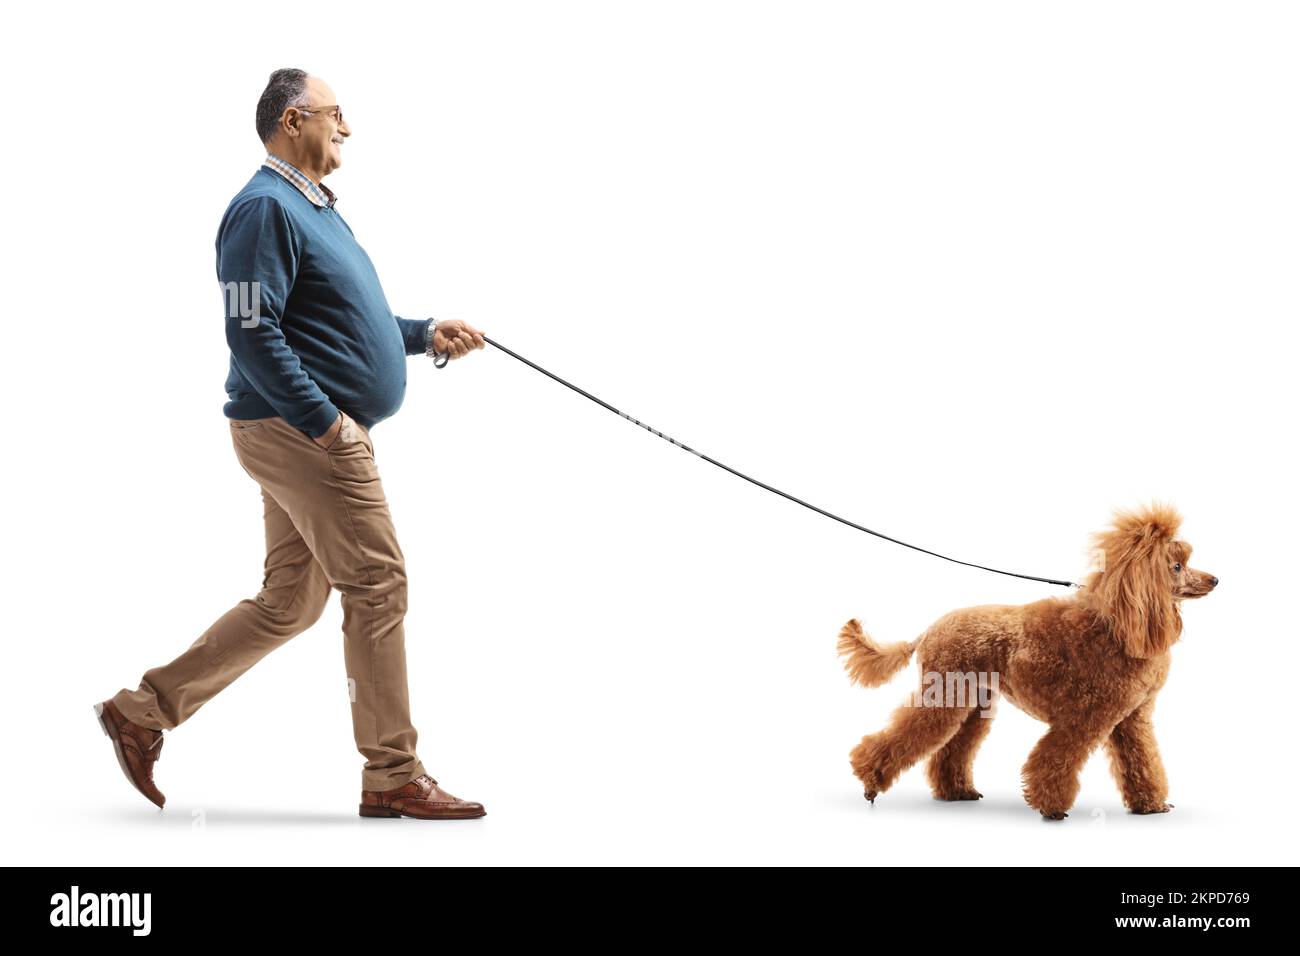 Full length profile shot of a mature man walking a red poodle dog isolated on white background Stock Photo